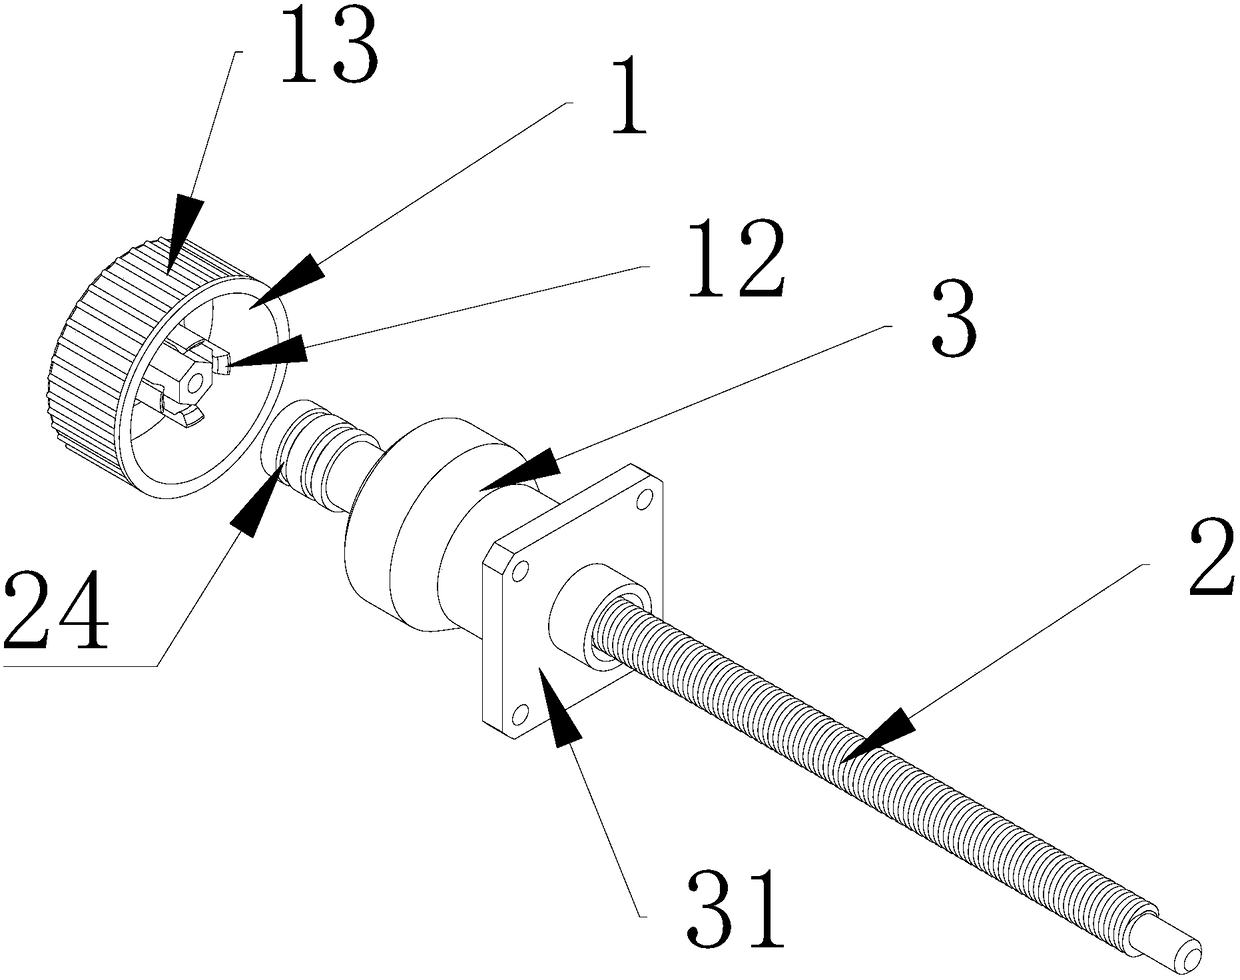 A new type of manual cap screwing mechanism with self-locking function